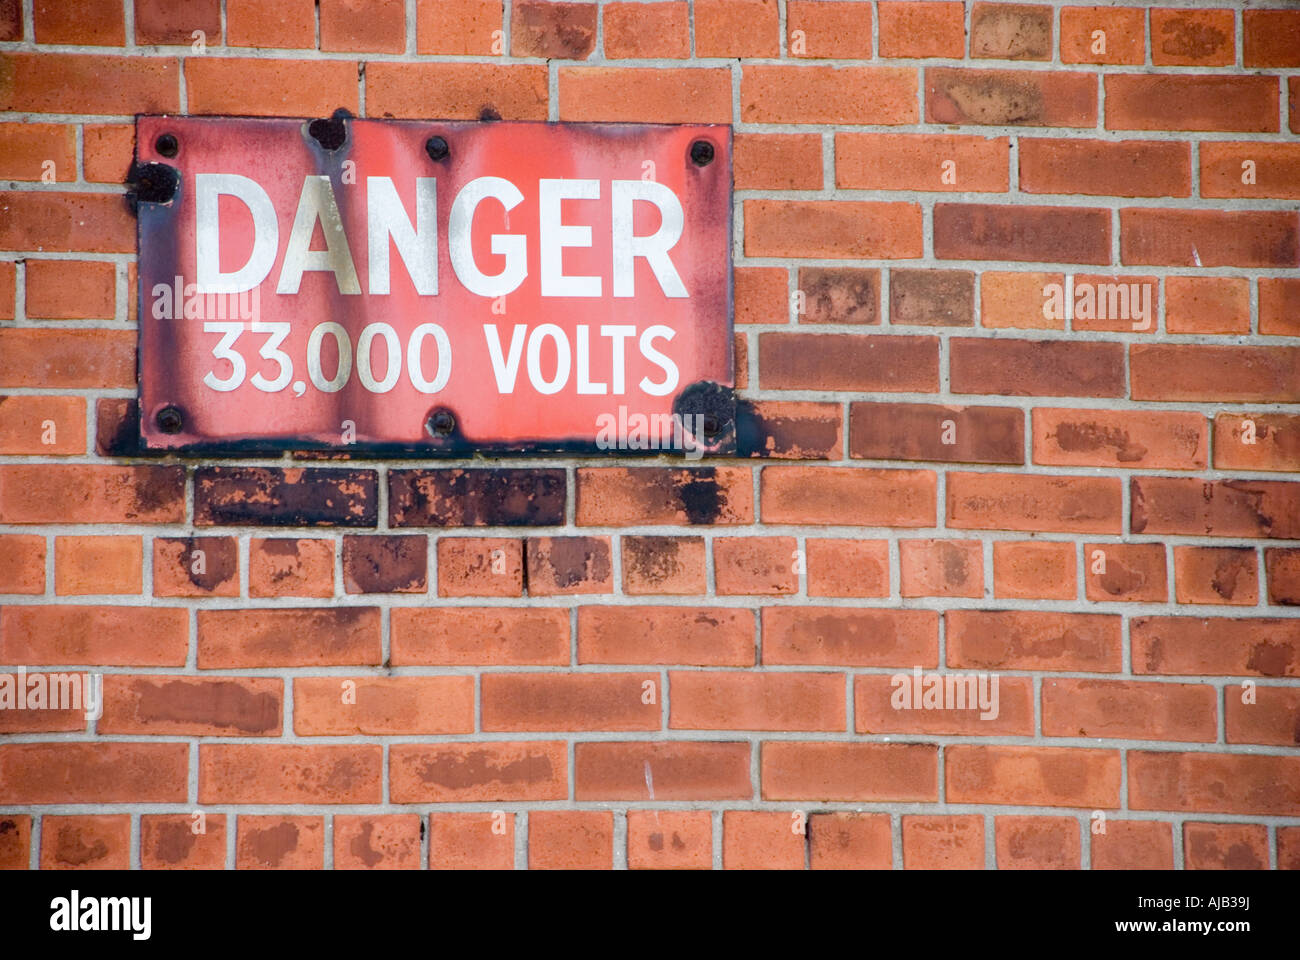 Warning sign outside an electricity substation saying 'Danger, 33,000 volts' Stock Photo